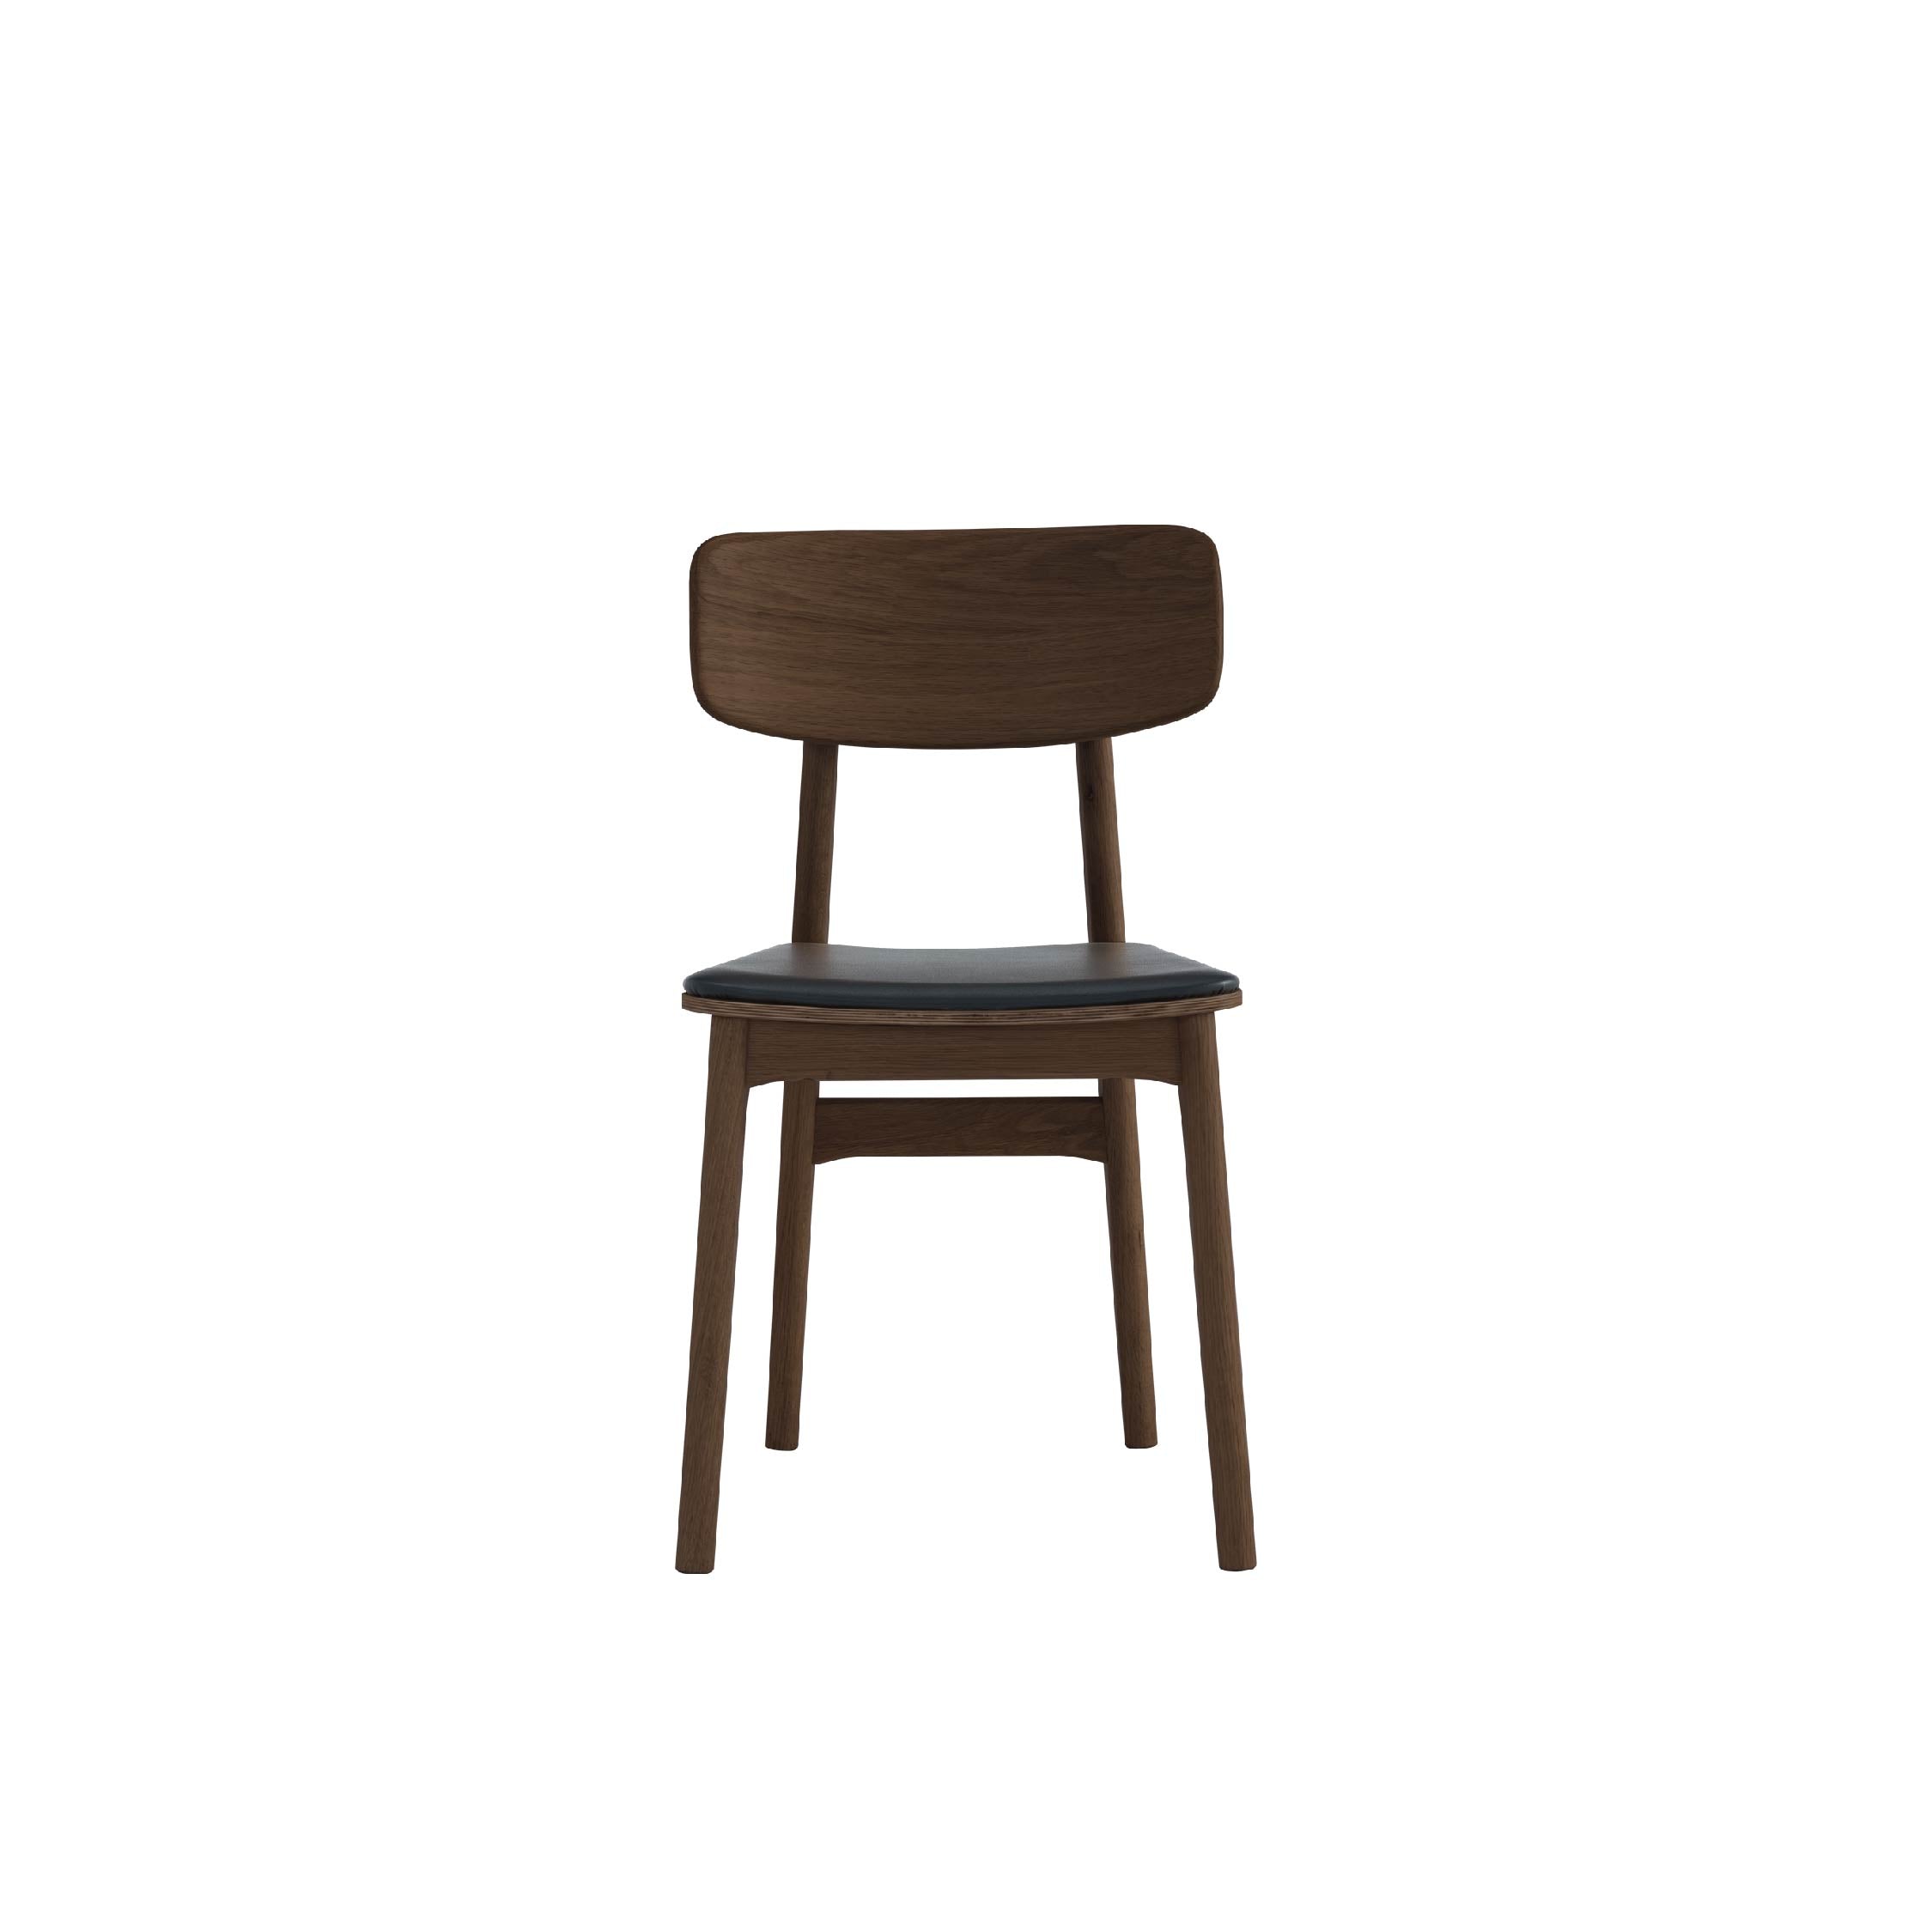 SOLID Dining Chair I (2 pcs.)